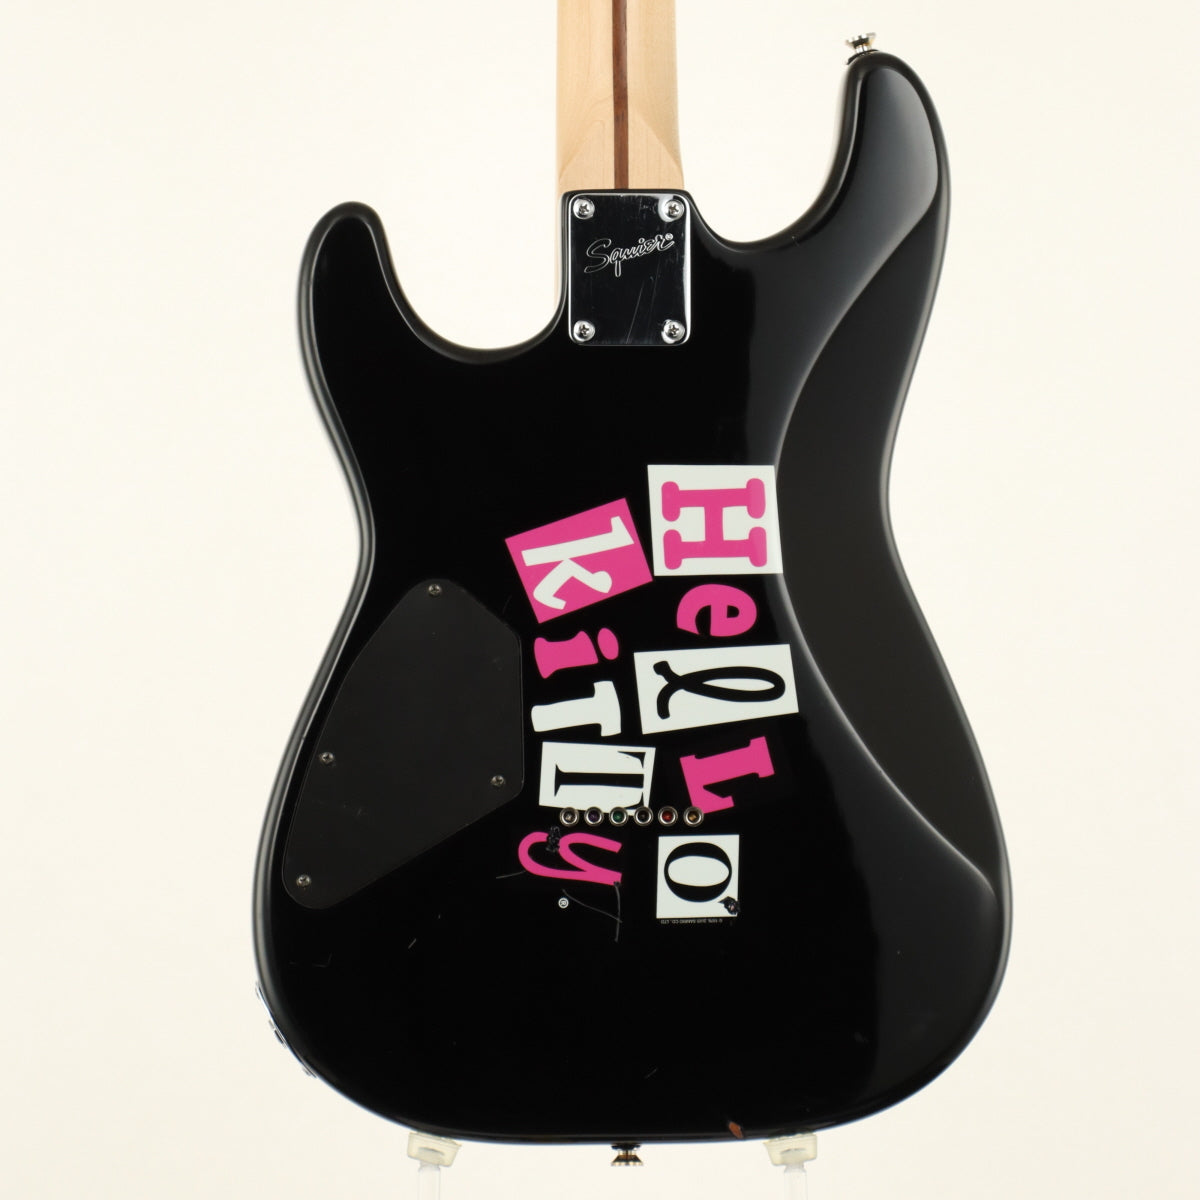 Squier by Fender(スクワイヤーbyフェンダー) Hello Kitty Mini(ハロー 